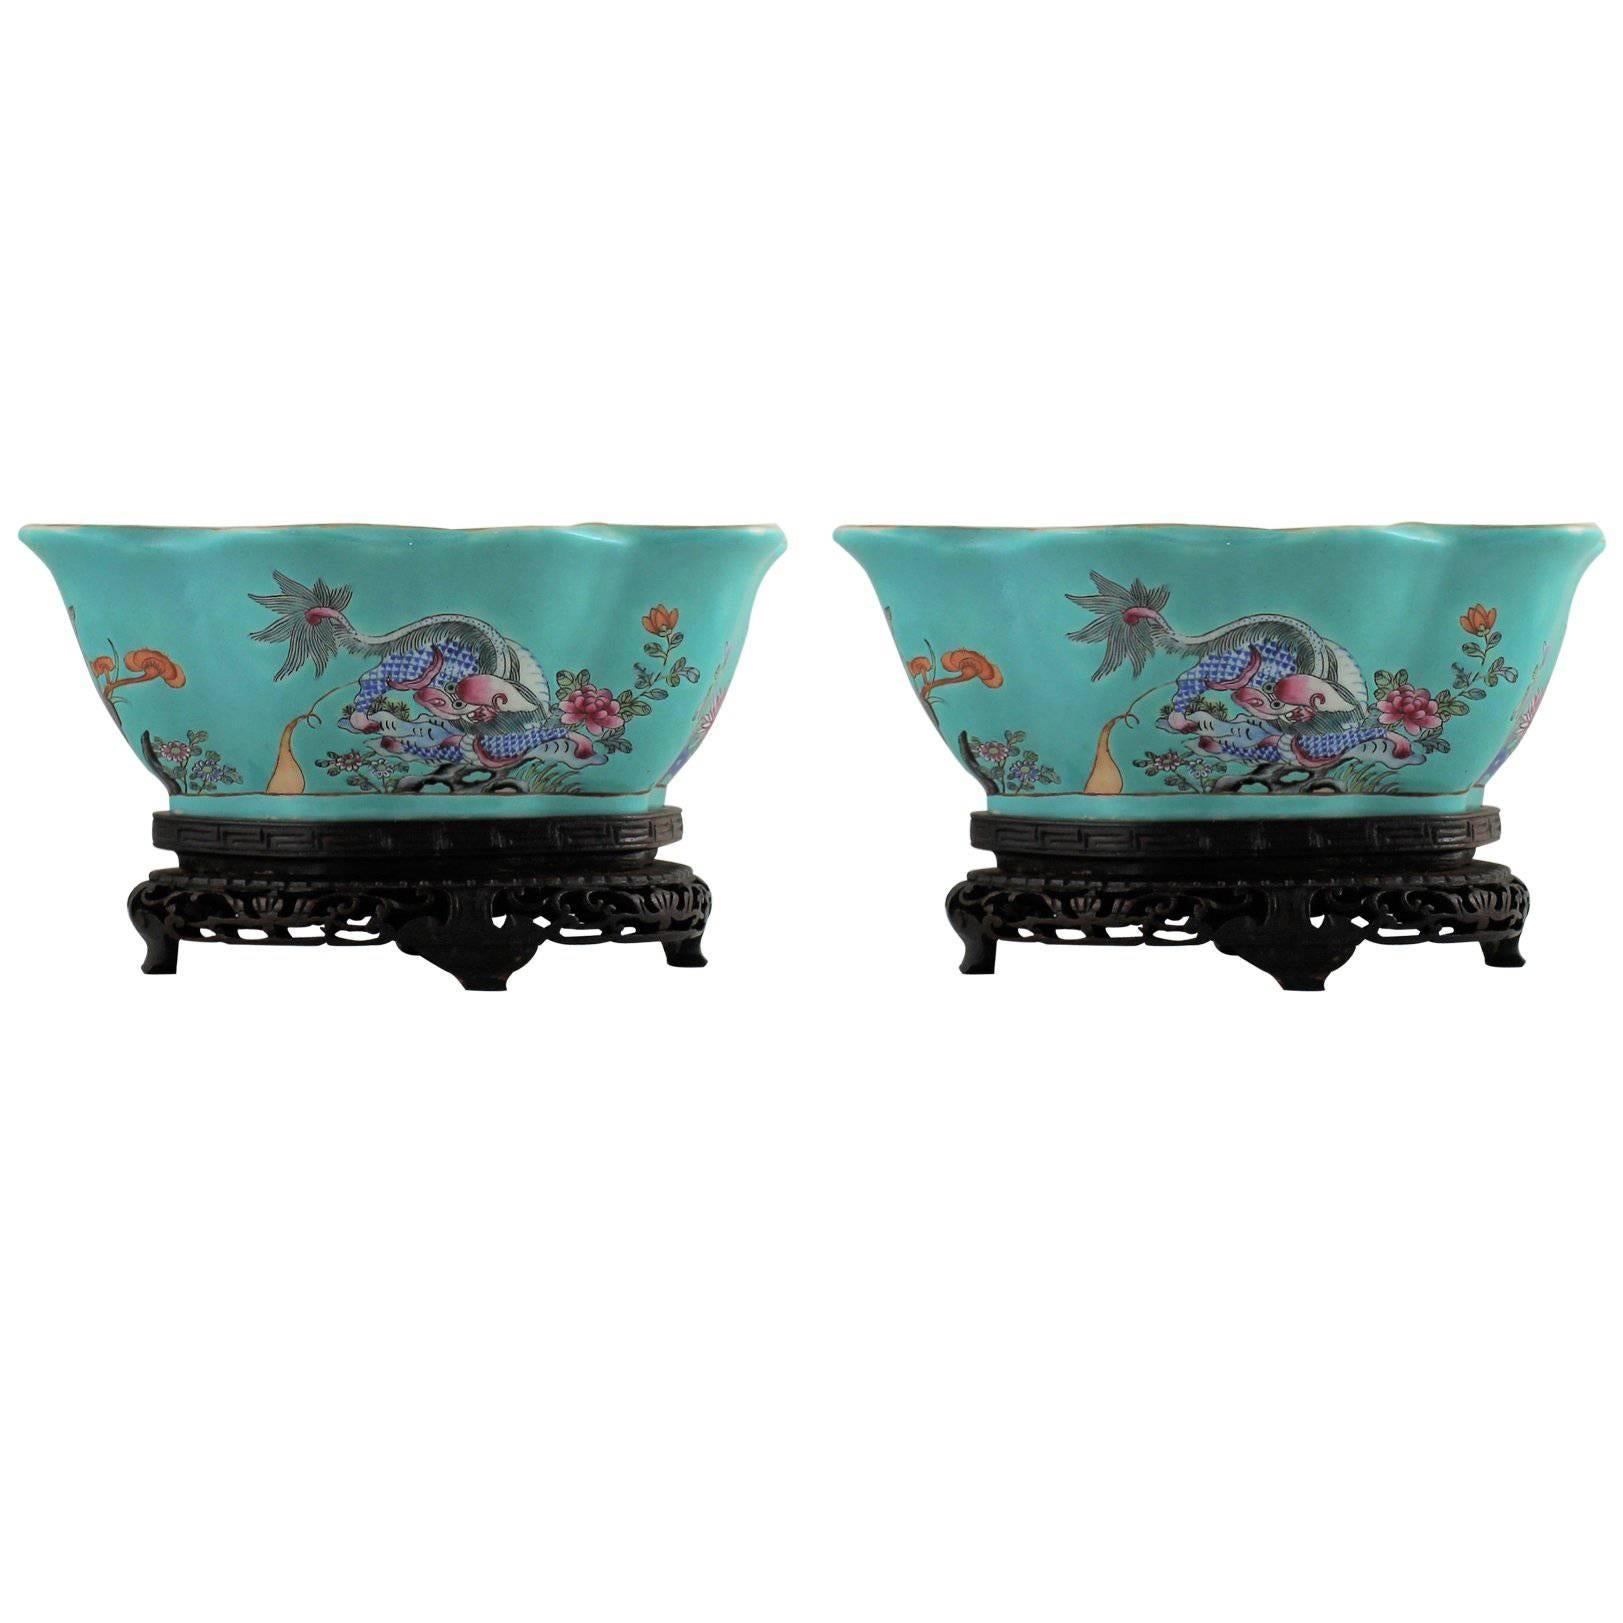 Pair of Chinese Porcelain Bowls on Stands